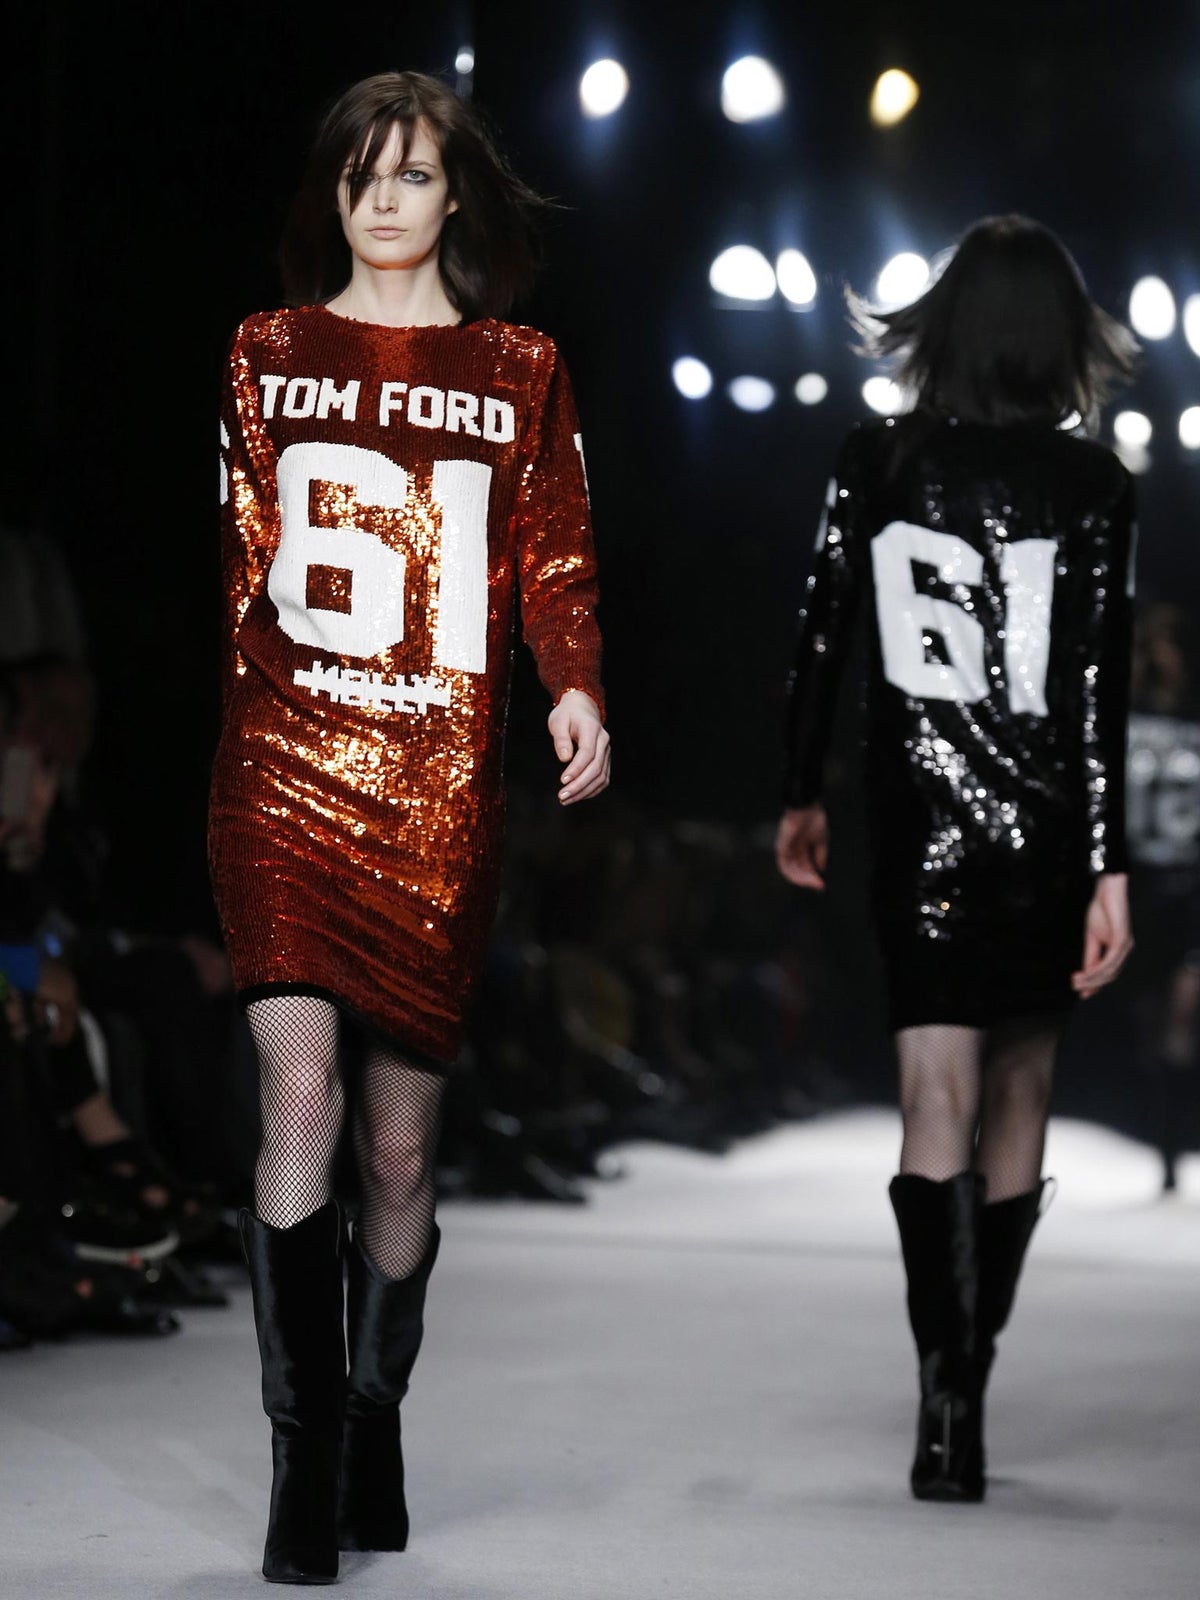 Live stream: Watch Tom Ford's first 'see now, buy now' fashion show